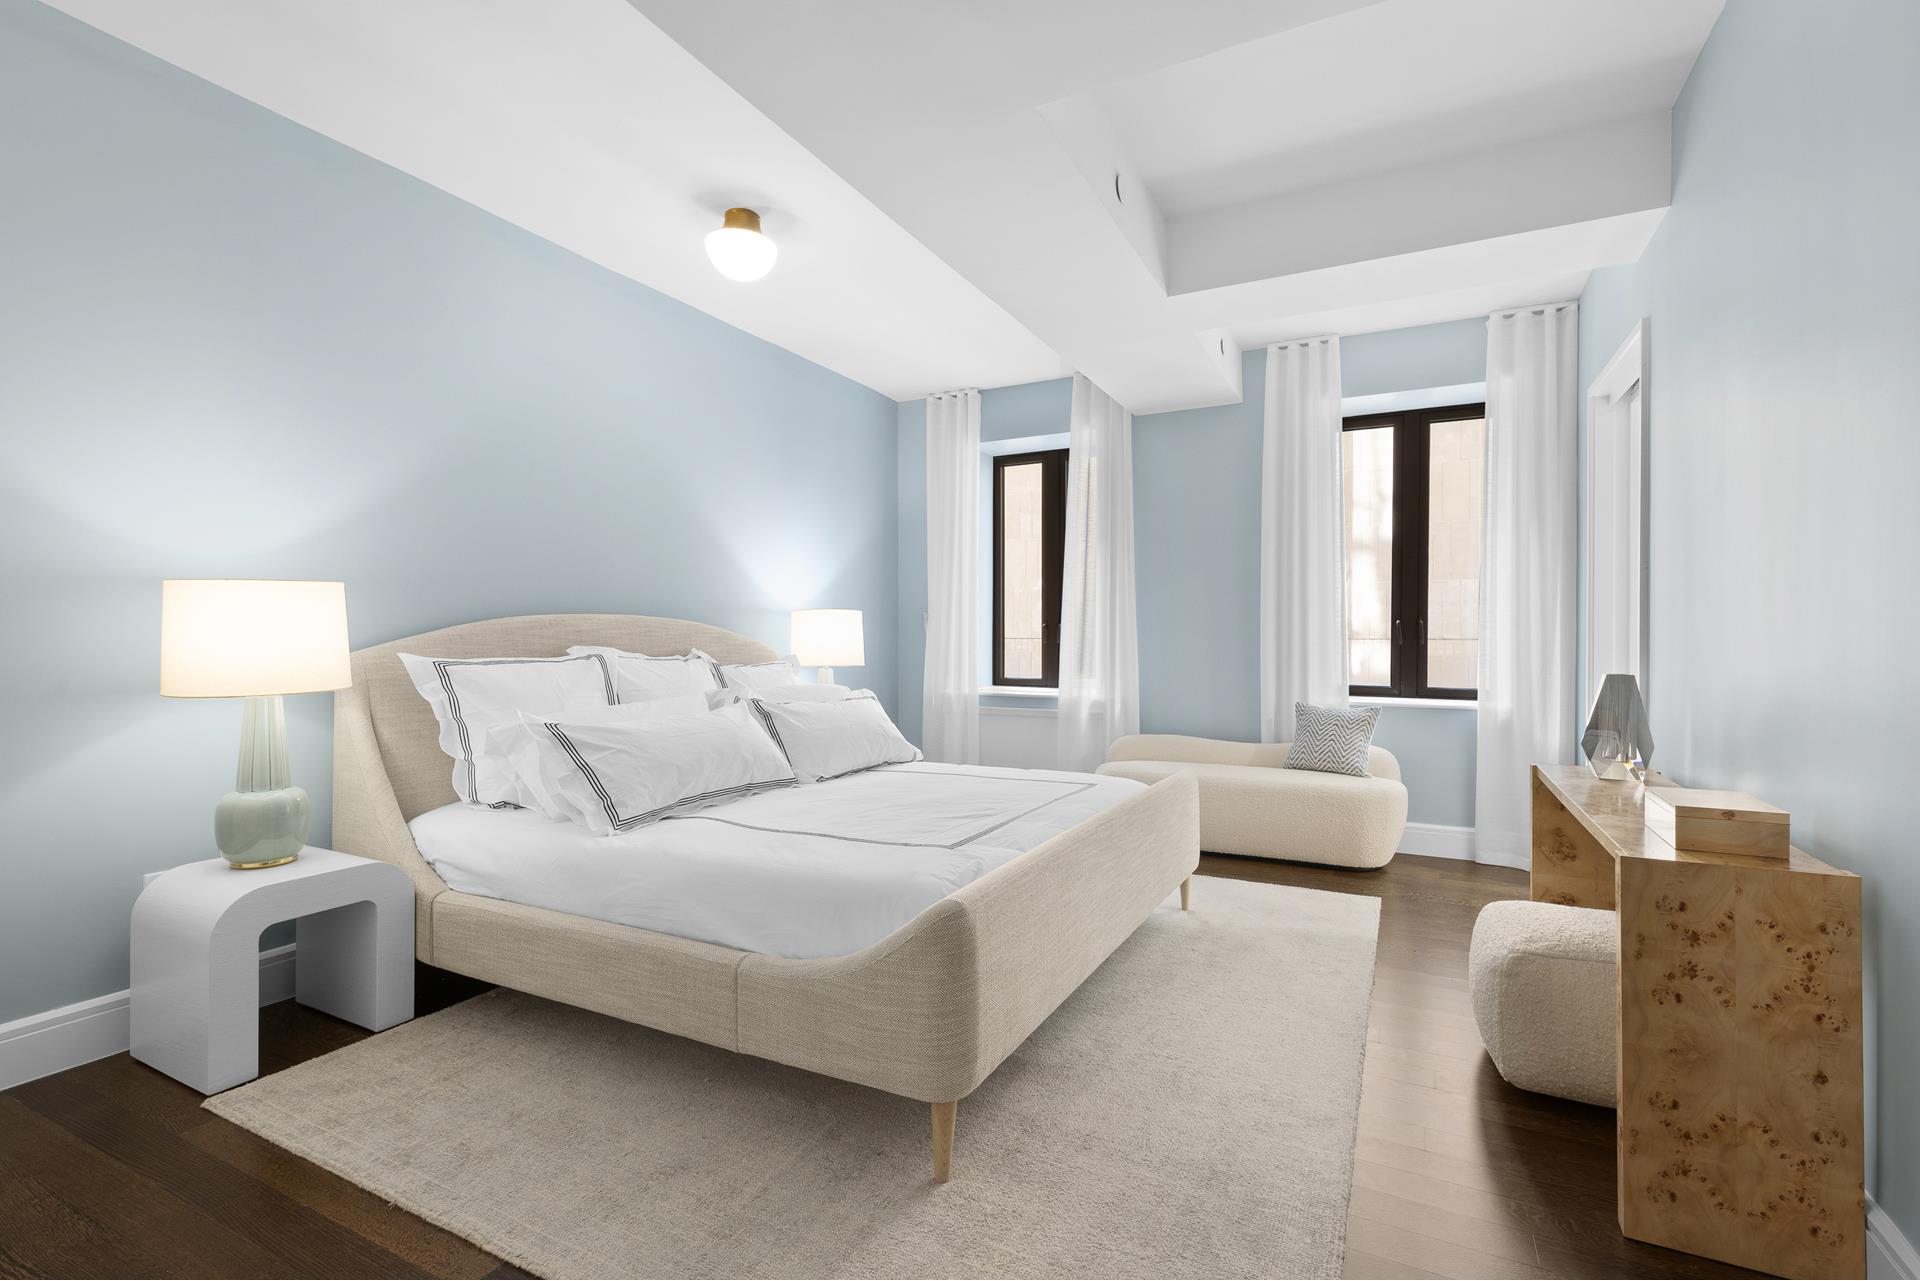 220 East 20th Street Mais1, Gramercy Park, Downtown, NYC - 3 Bedrooms  
3.5 Bathrooms  
6 Rooms - 